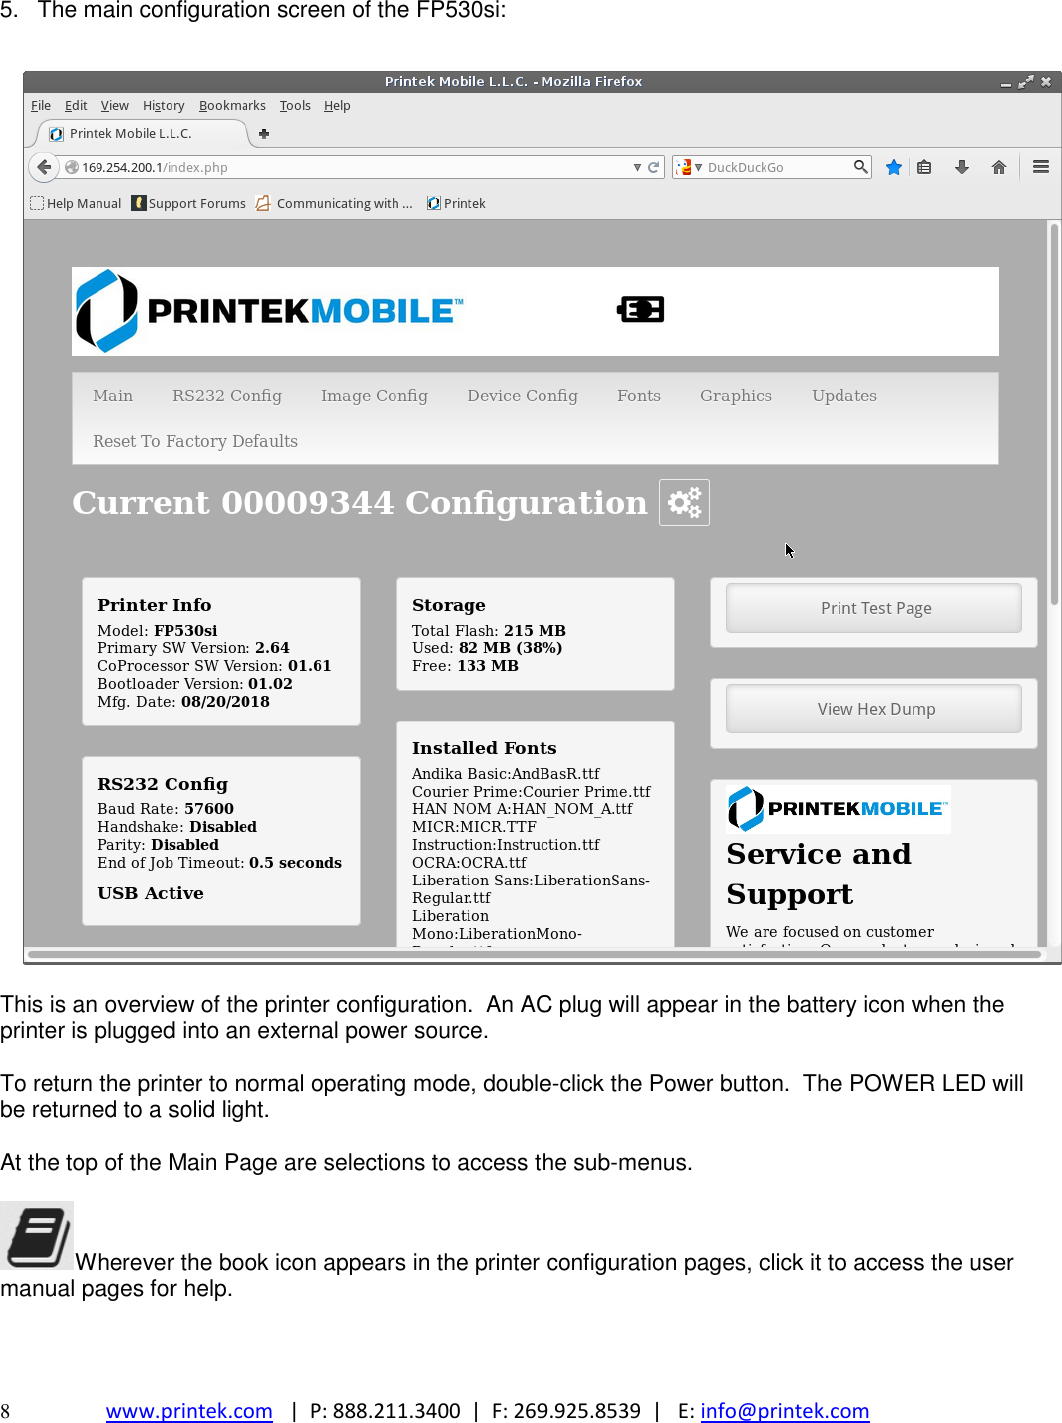  8  www.printek.com   |  P: 888.211.3400  |  F: 269.925.8539  |   E: info@printek.com  5.  The main configuration screen of the FP530si:    This is an overview of the printer configuration.  An AC plug will appear in the battery icon when the printer is plugged into an external power source.  To return the printer to normal operating mode, double-click the Power button.  The POWER LED will be returned to a solid light.  At the top of the Main Page are selections to access the sub-menus.  Wherever the book icon appears in the printer configuration pages, click it to access the user manual pages for help.    